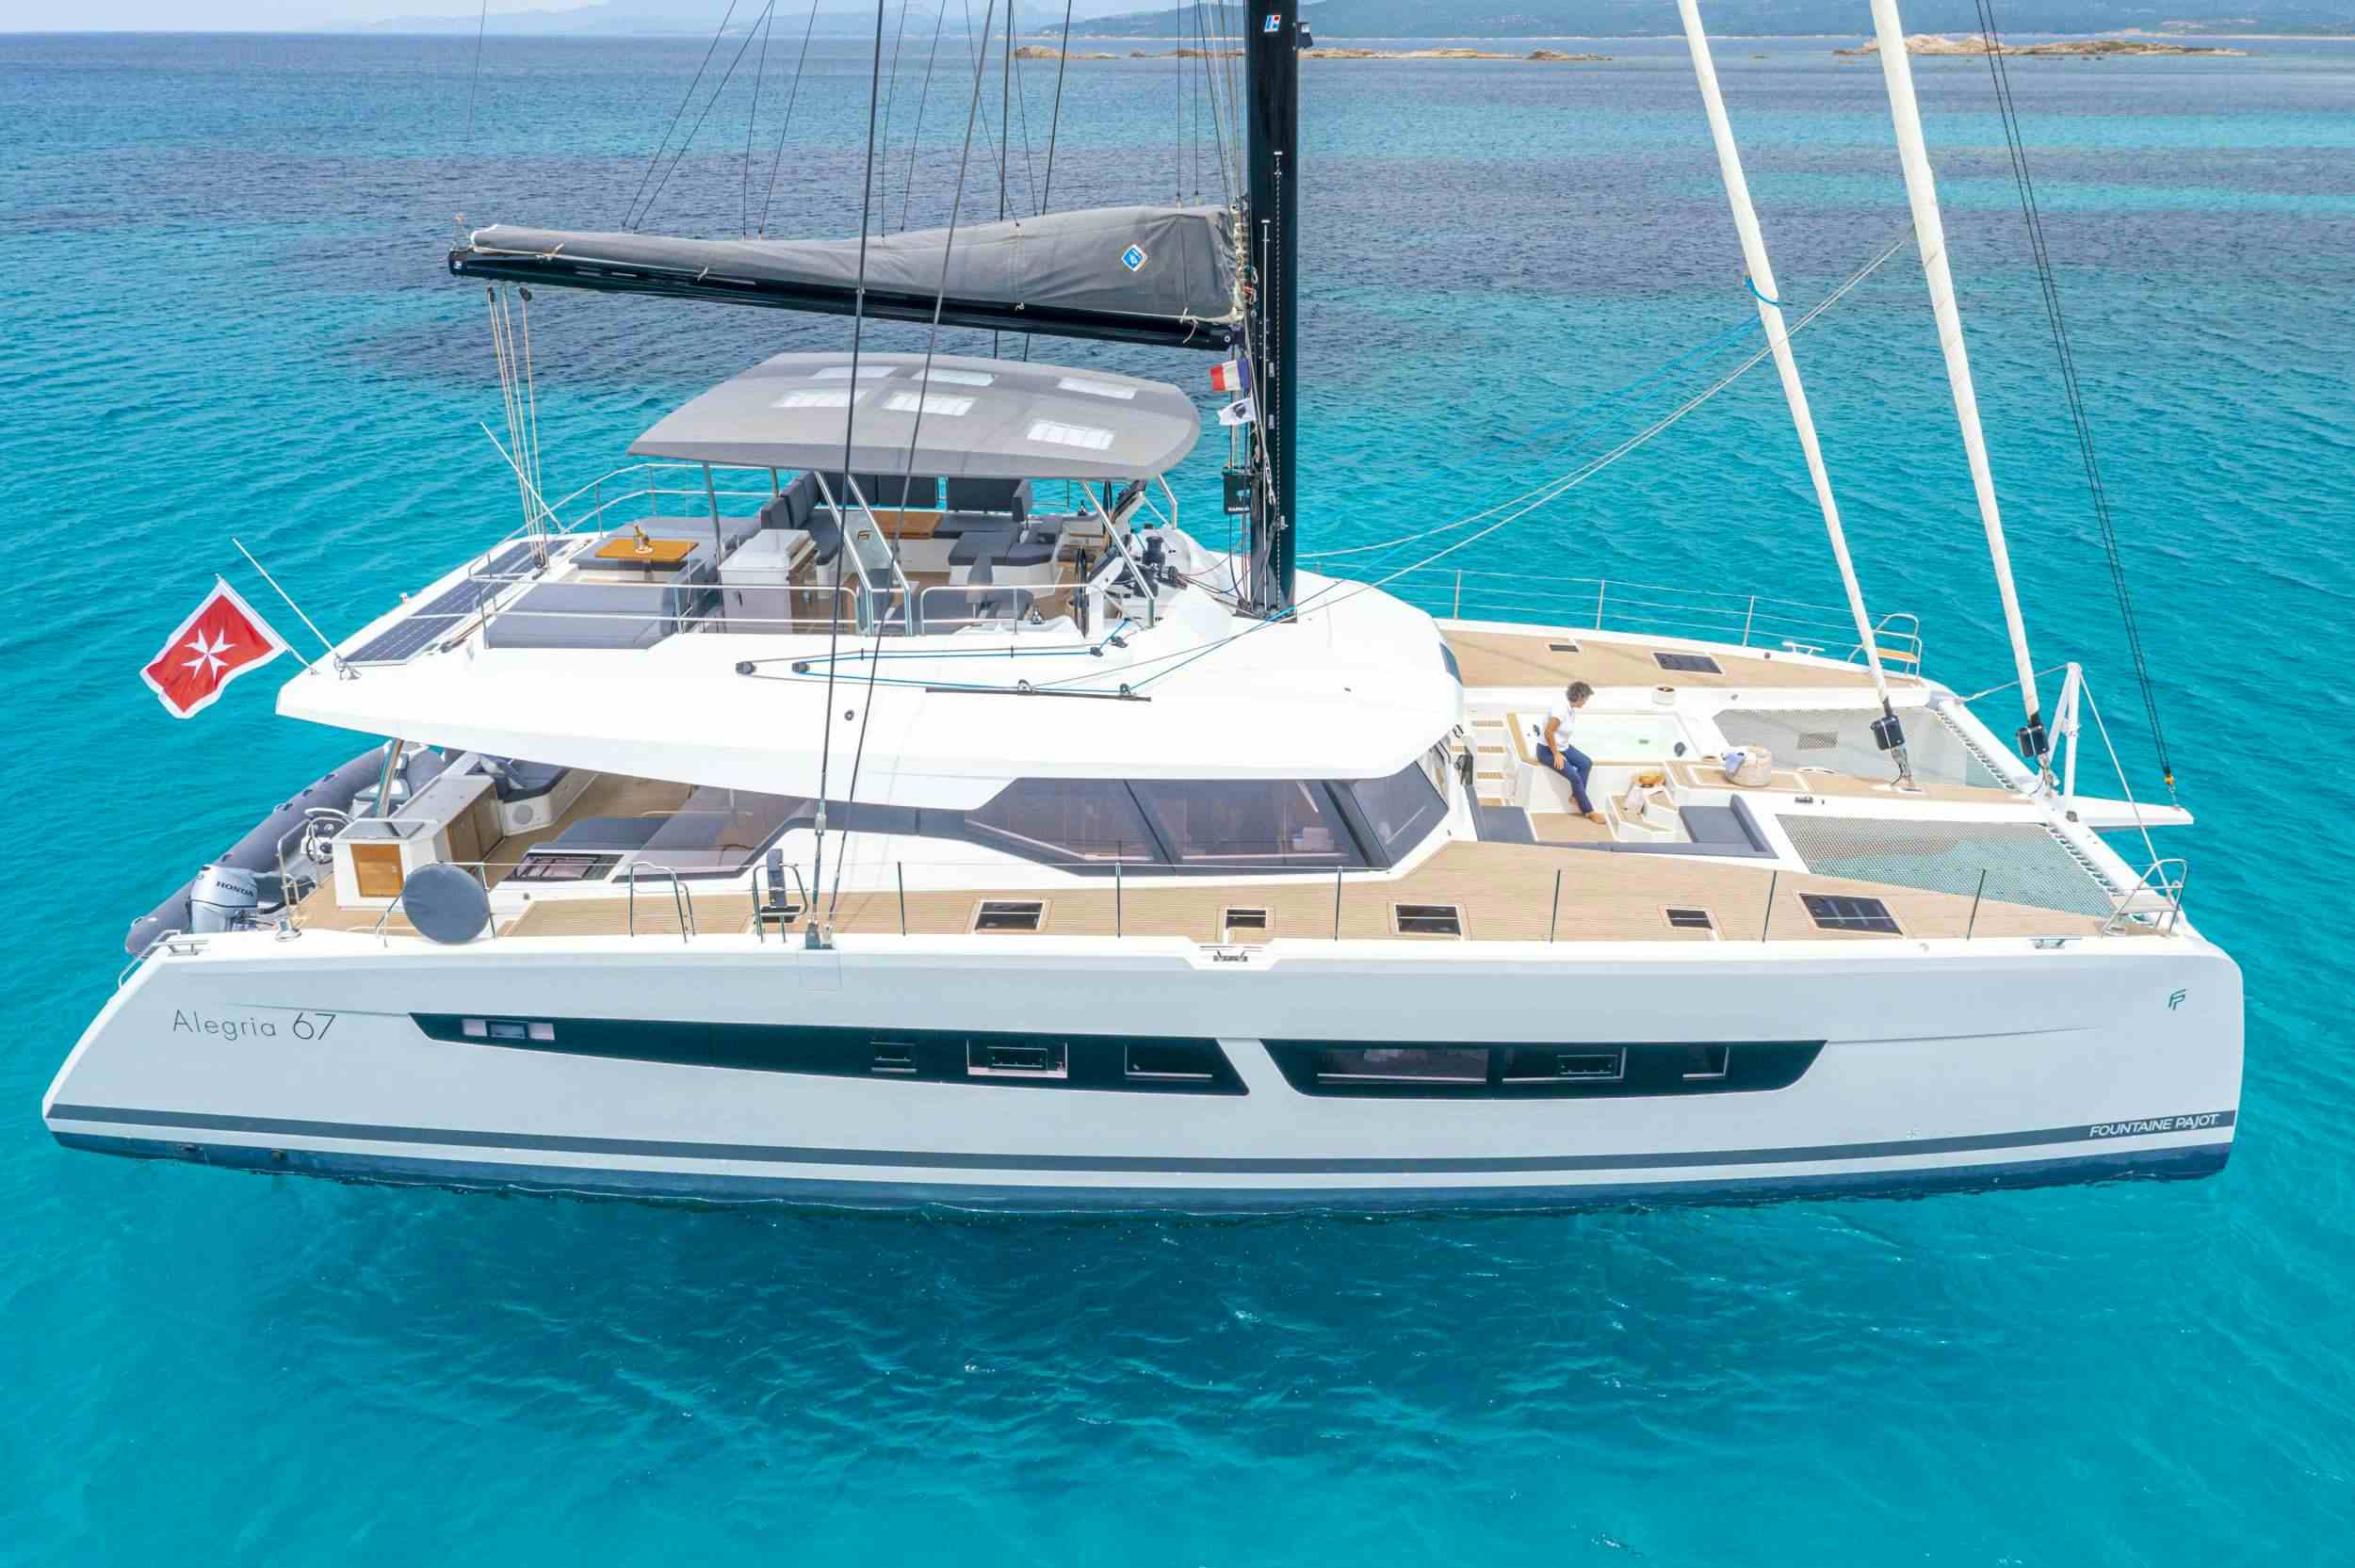 SEMPER FIDELIS  - Yacht Charter Placencia & Boat hire in Bahamas & Caribbean 1